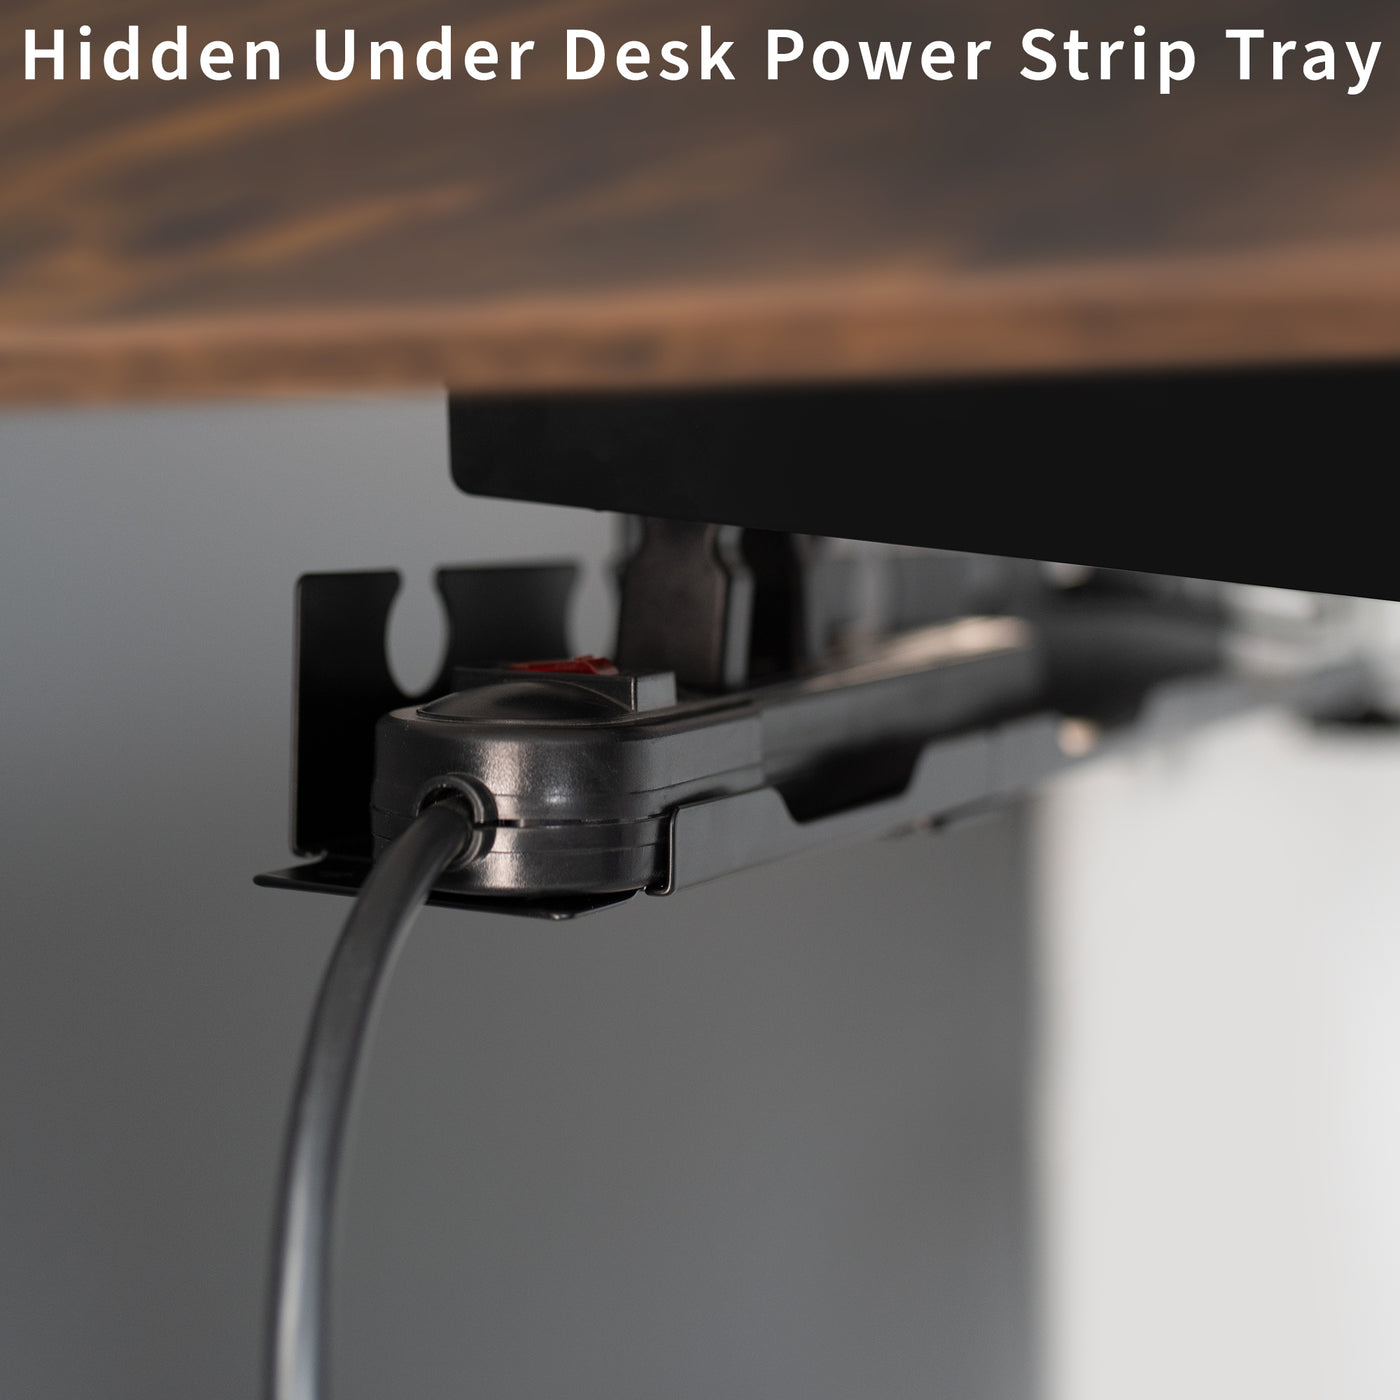  Steel 19 inch Clamp-on Modular Power Strip Tray System for Desk, No Drill Cable Management Workspace Organizer, Clean Cord Routing, Open Design for Ventilation